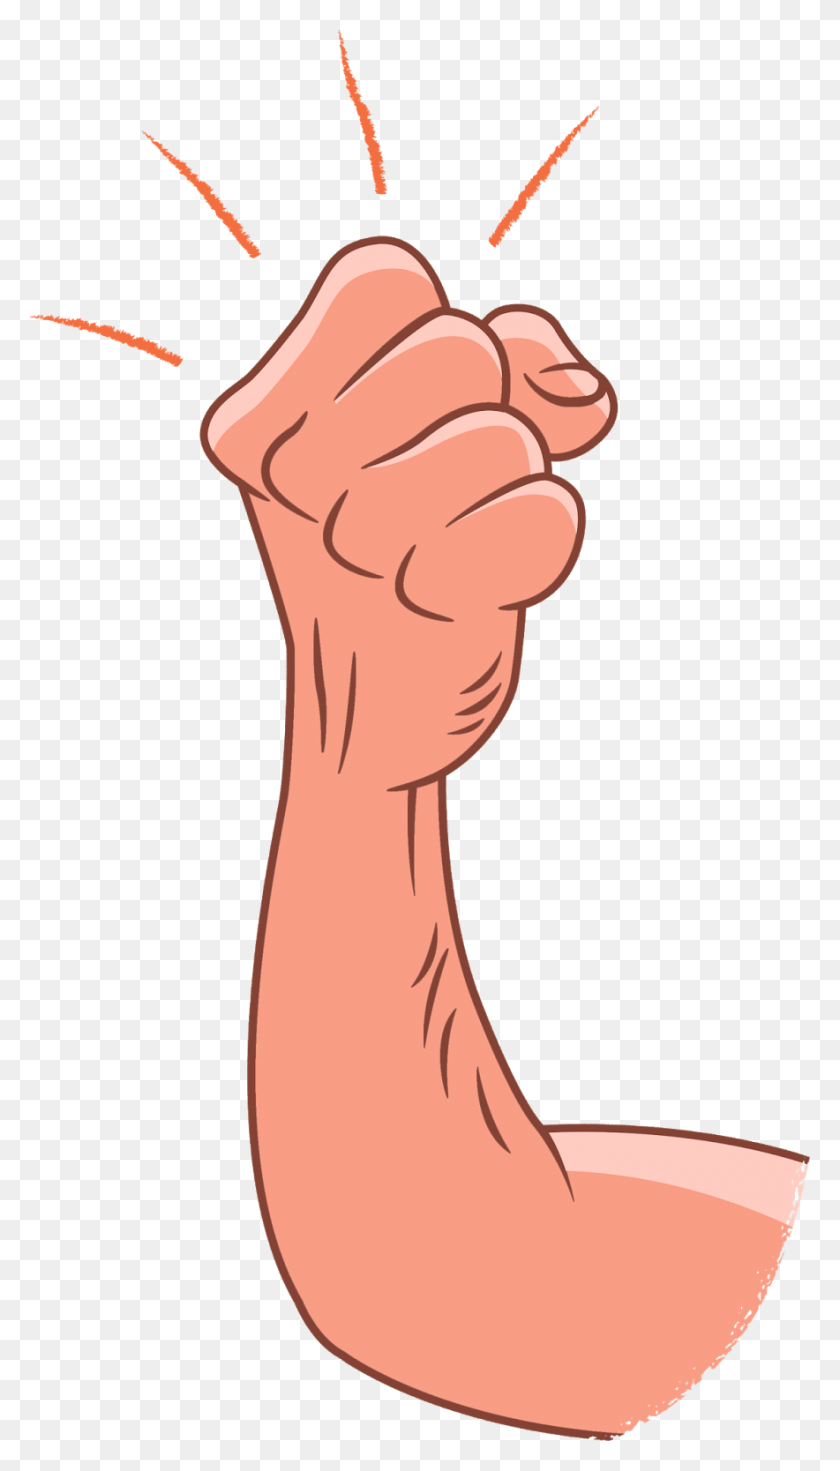 884x1600 Roccoblog Here Are Some Details From The Shaking Fist, Hand, Wrist HD PNG Download